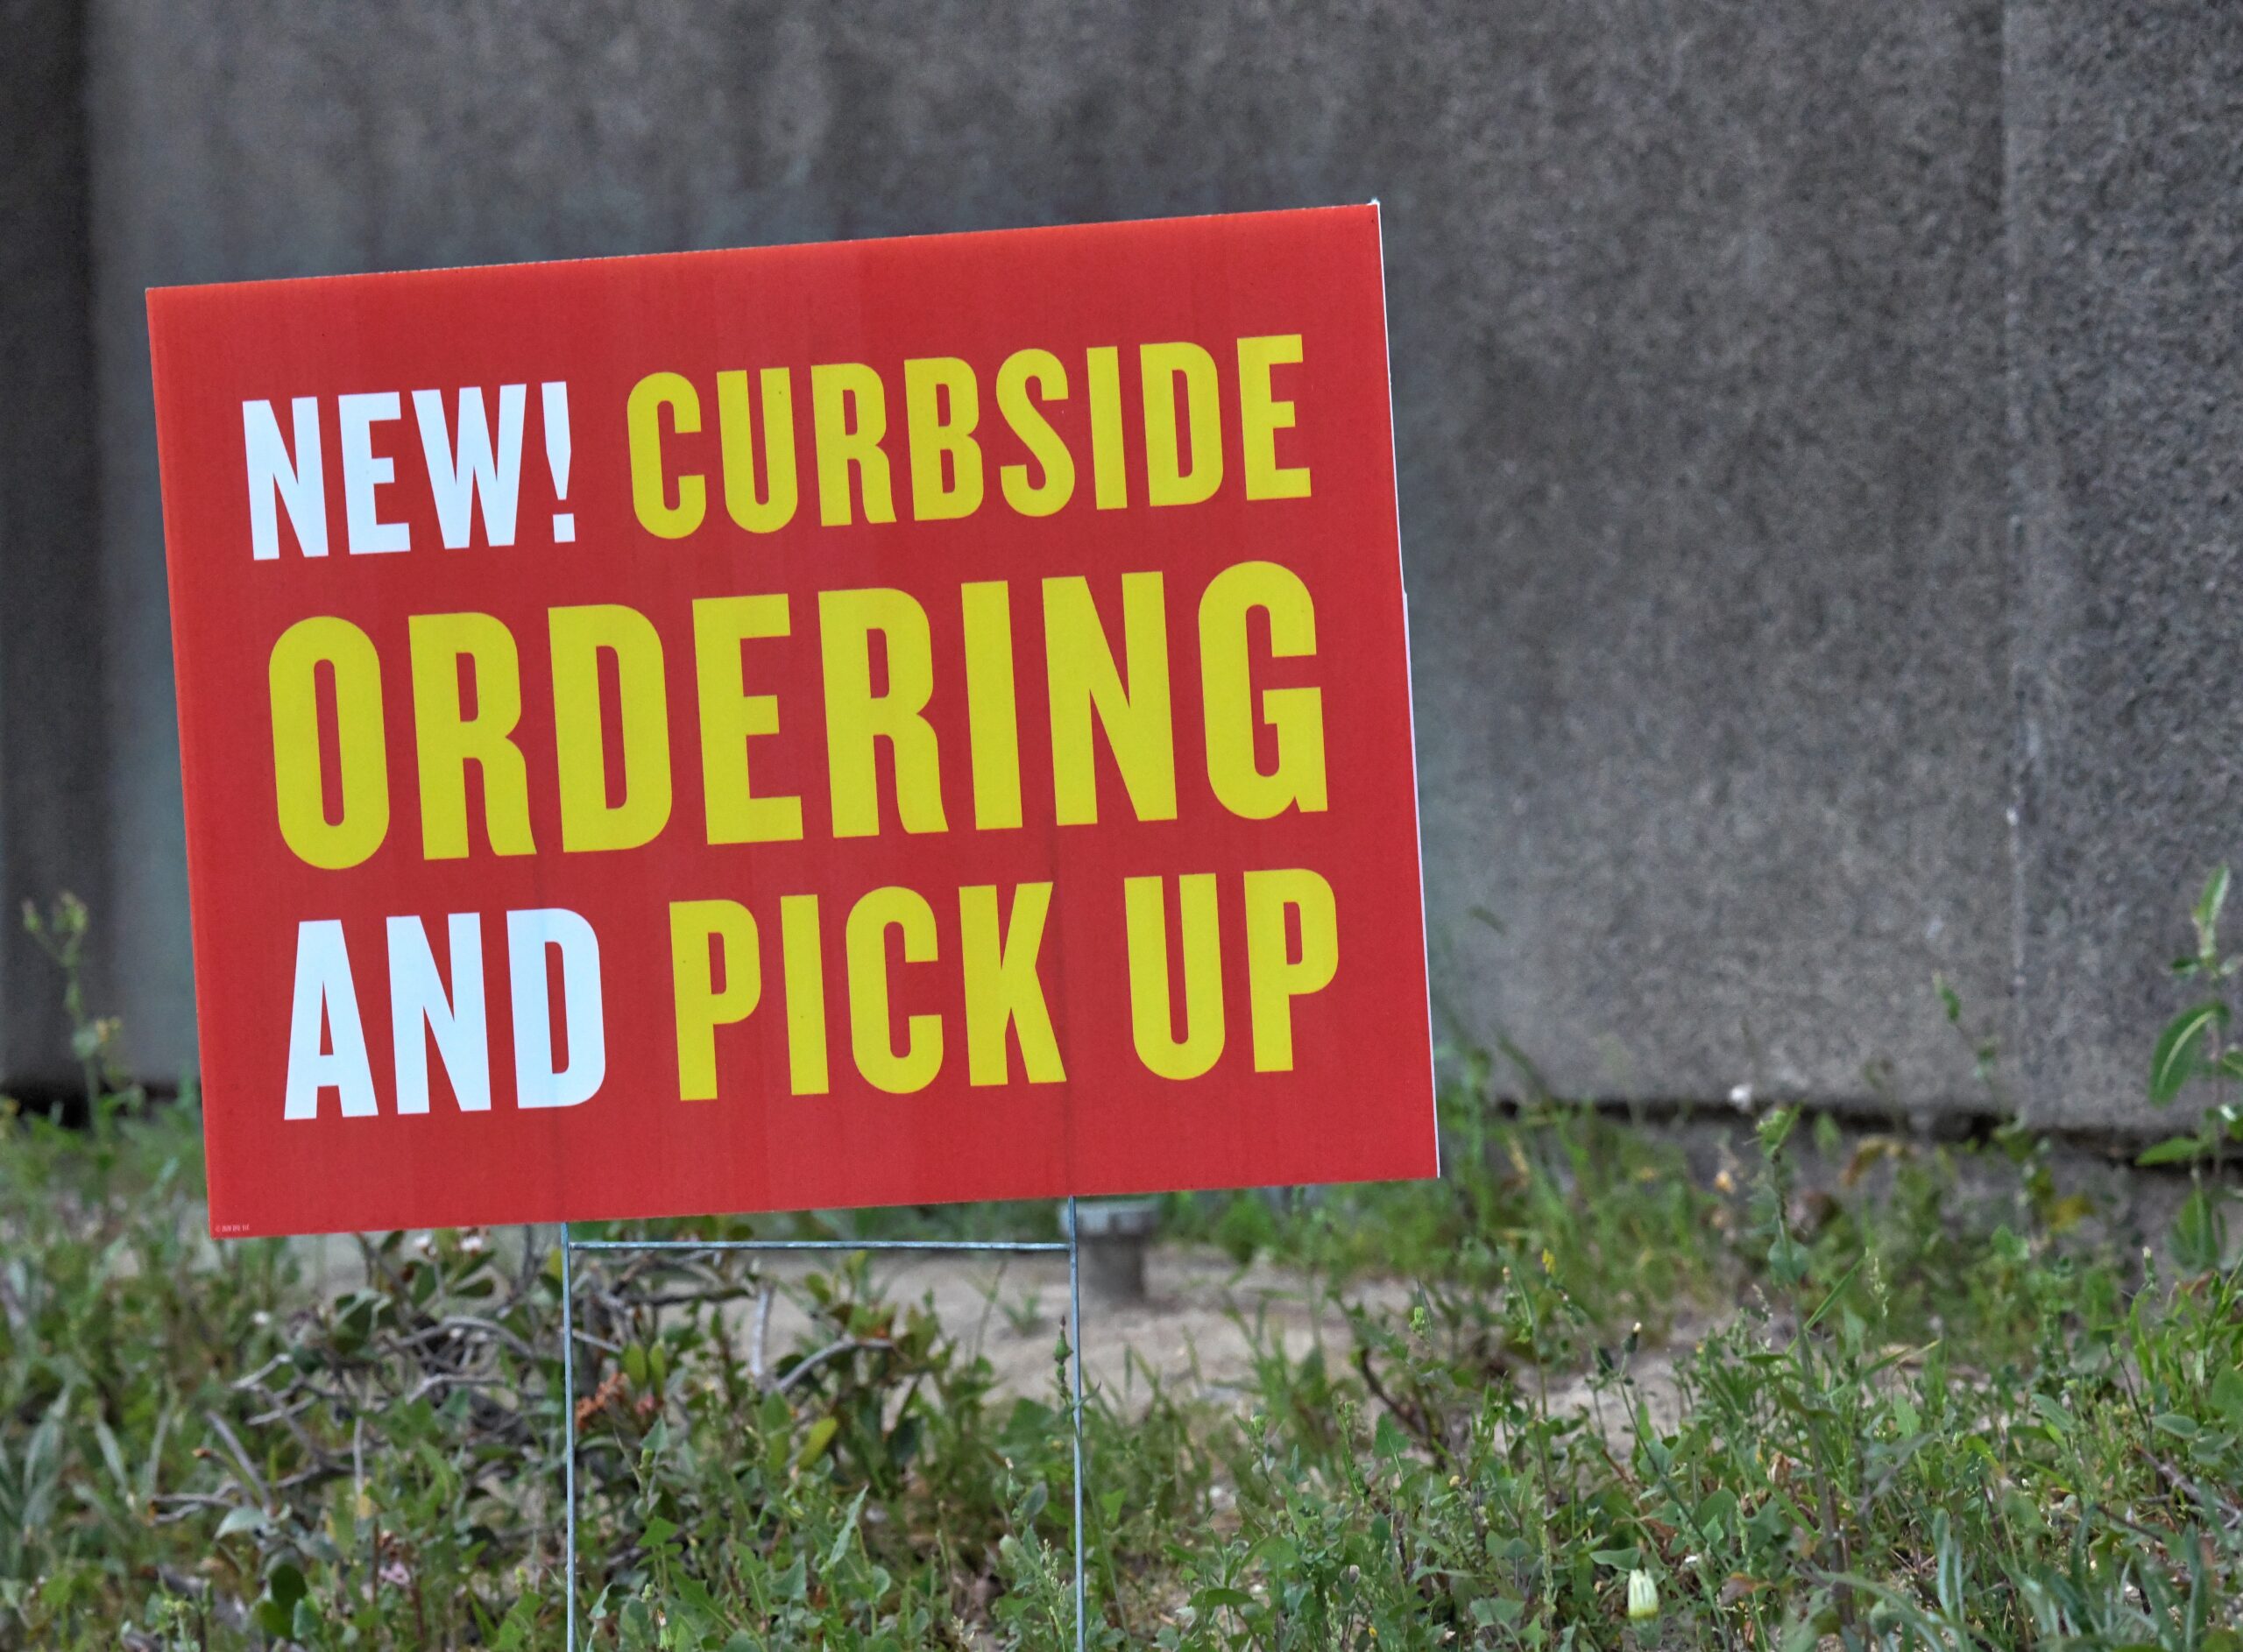 curbside pickup sign